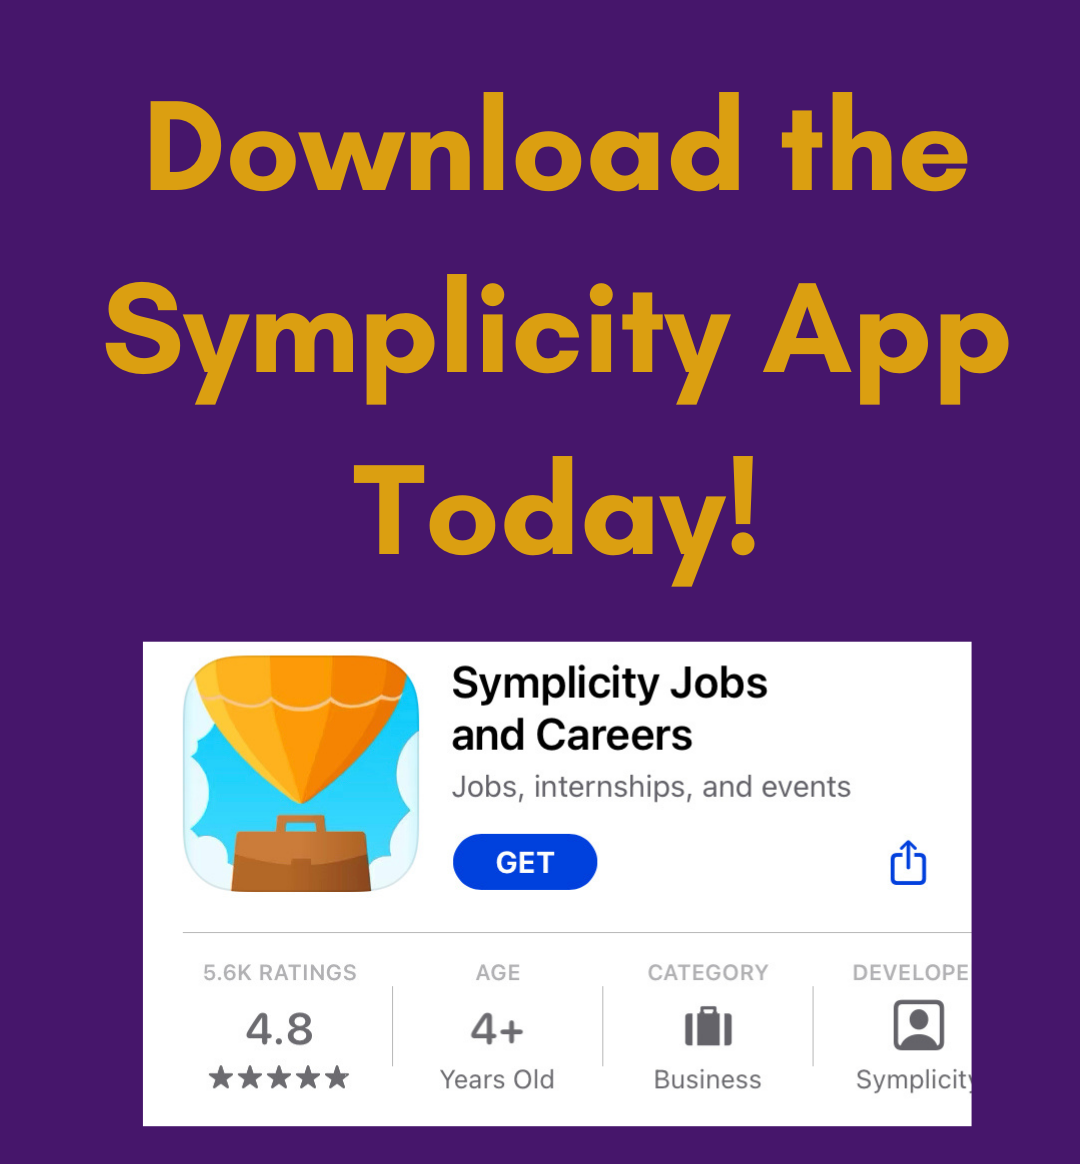 Download the Symplicity App Today! Image includes a screenshot of the Symplicity app logo (a yellow hot air balloon)